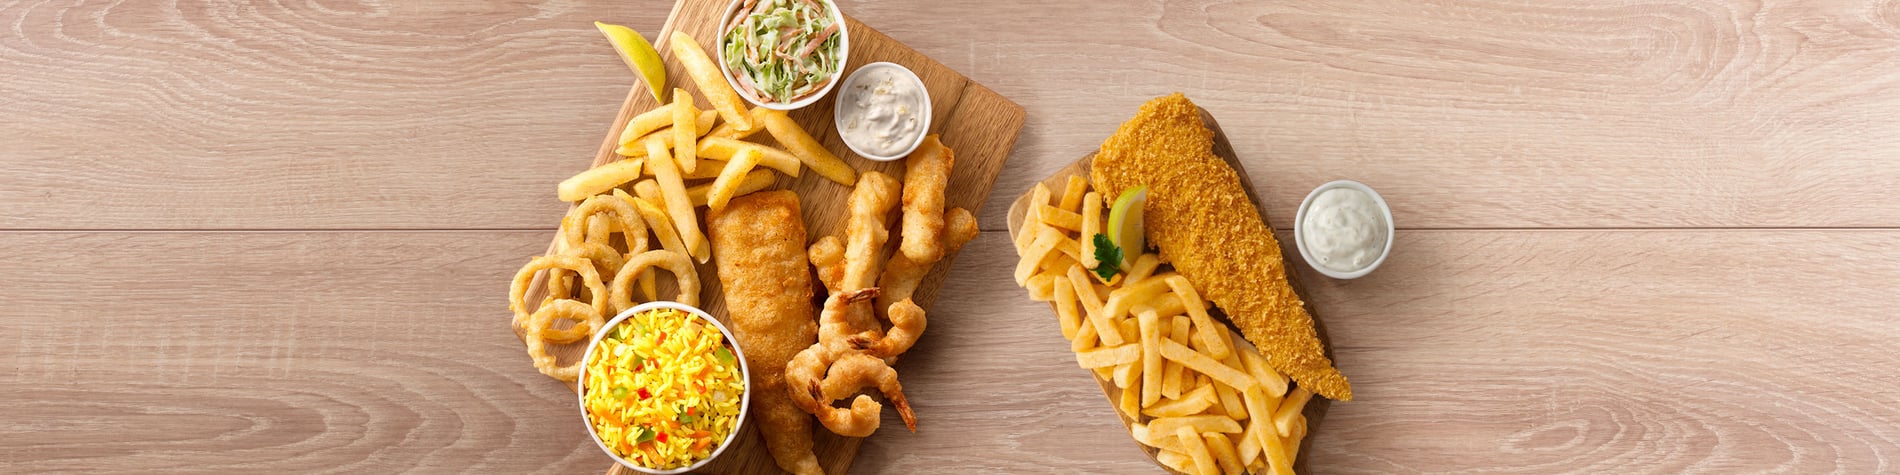 Seafood meals from Fishaways Vryheid including a Crunchy Fish and Chips meal and a seafood Platter for One with hake, calamari, prawns, chips, onion rings, and coleslaw.